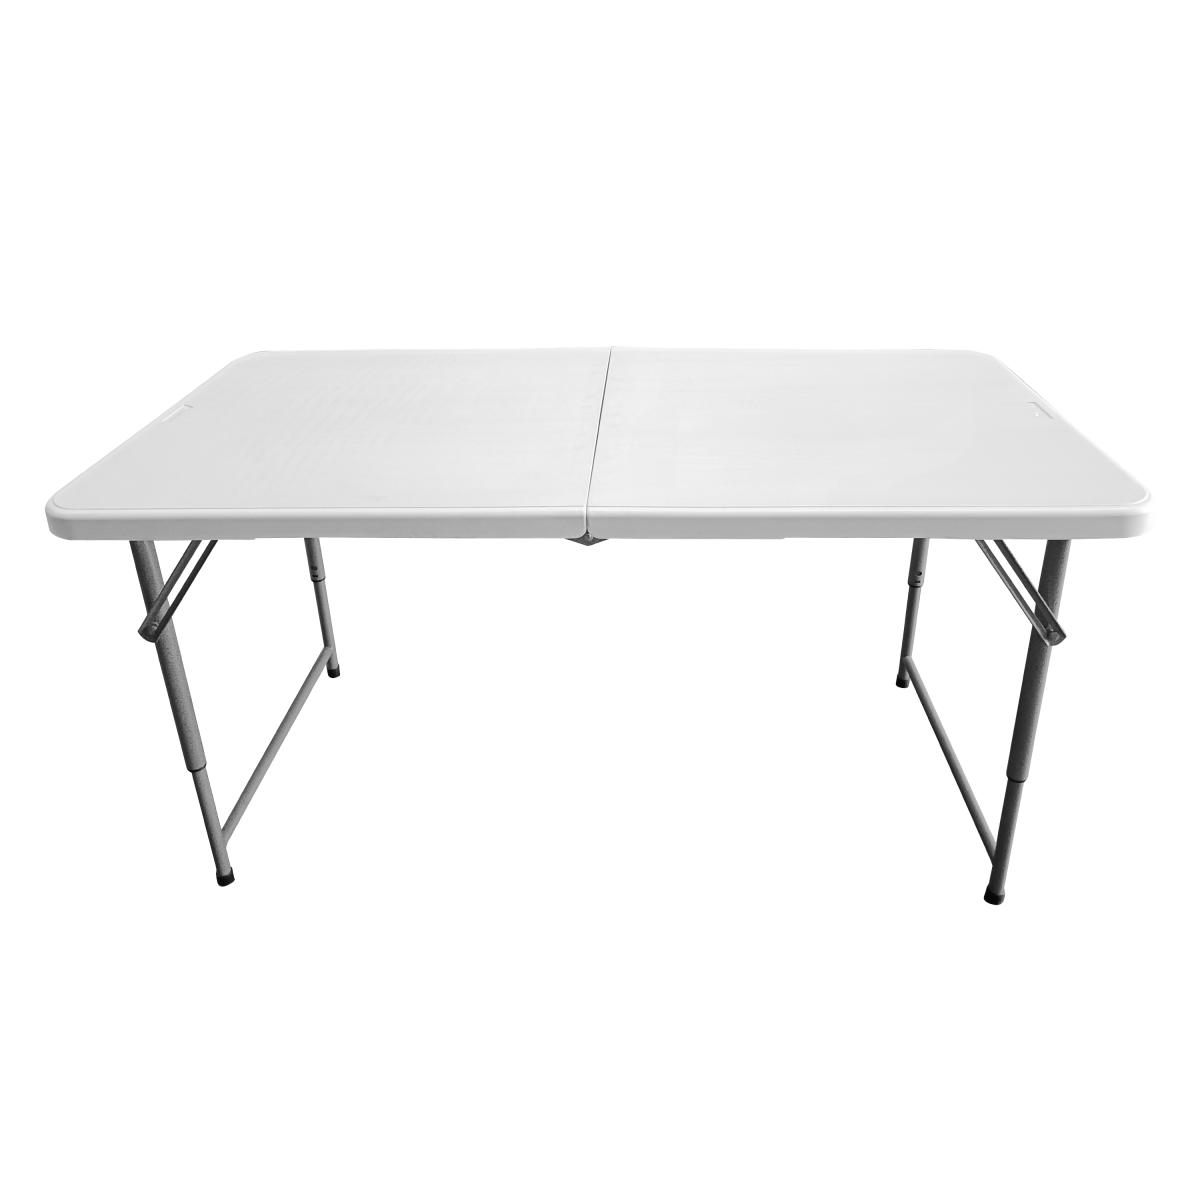 Techni Home 4 Ft Granite White Adjustable Height Folding Table with Easy-Carry Handle